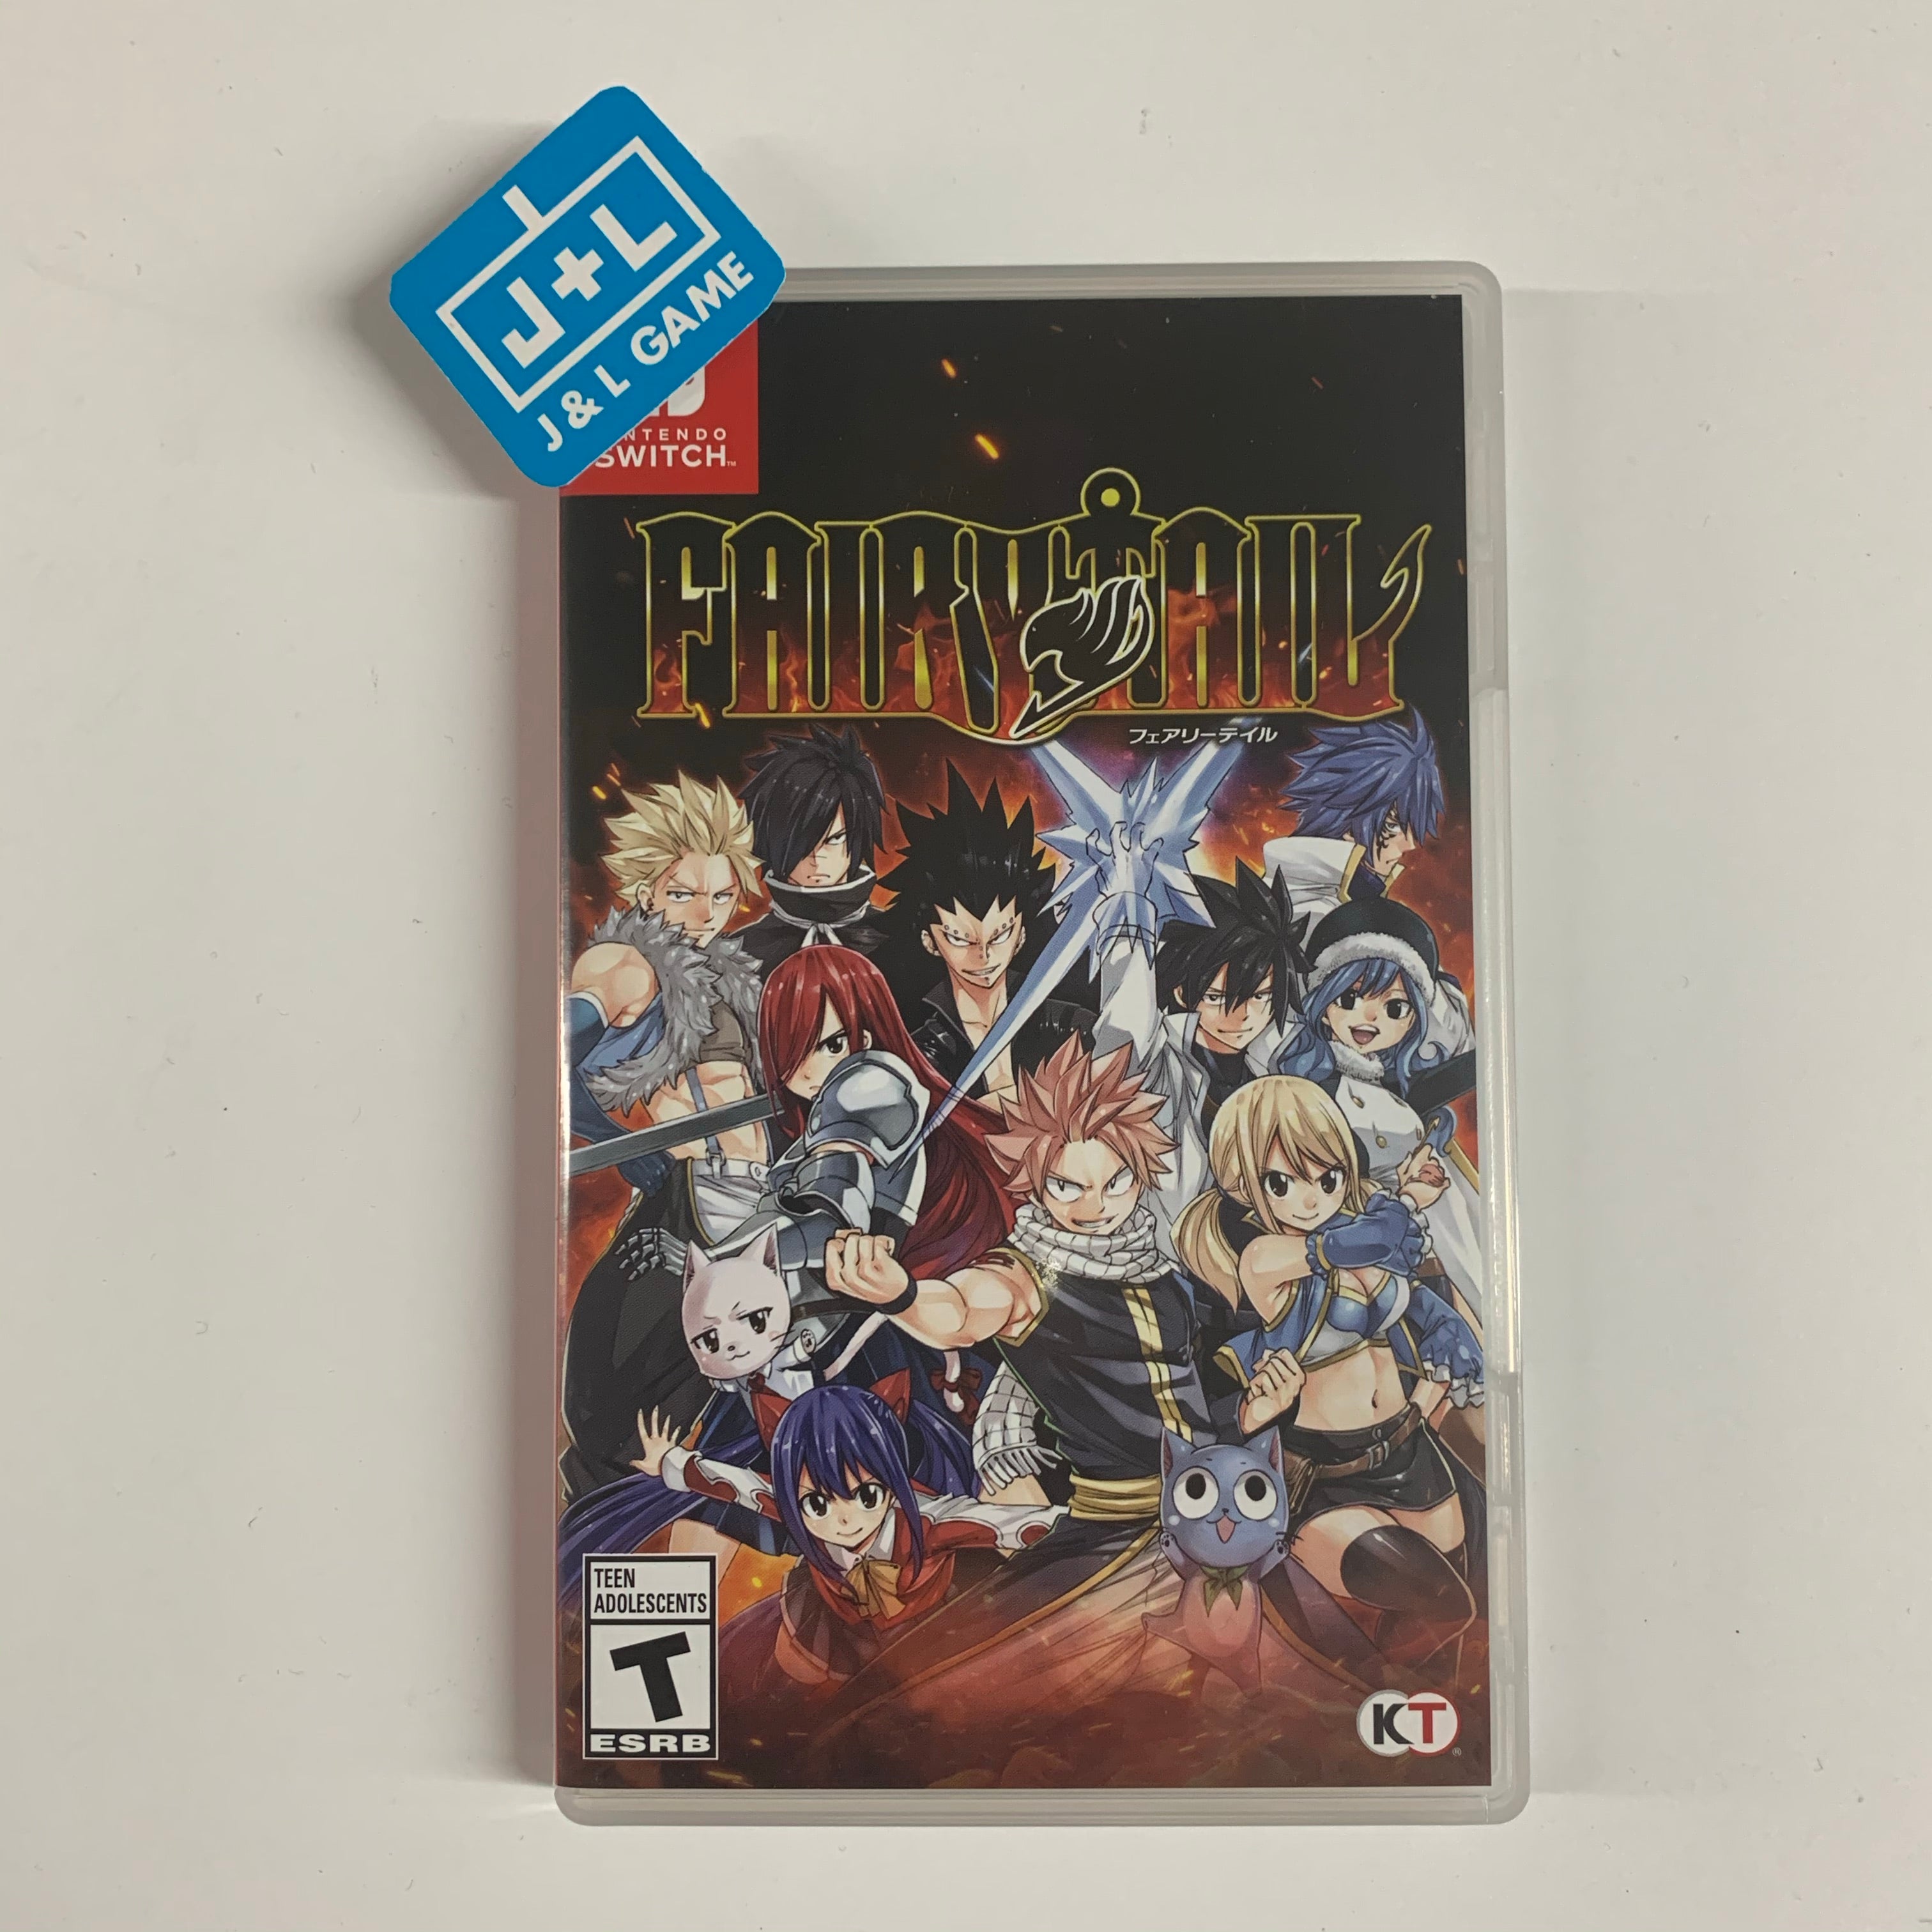 Fairy Tail - Nintendo Switch [Pre-OWNED] Video Games KT   